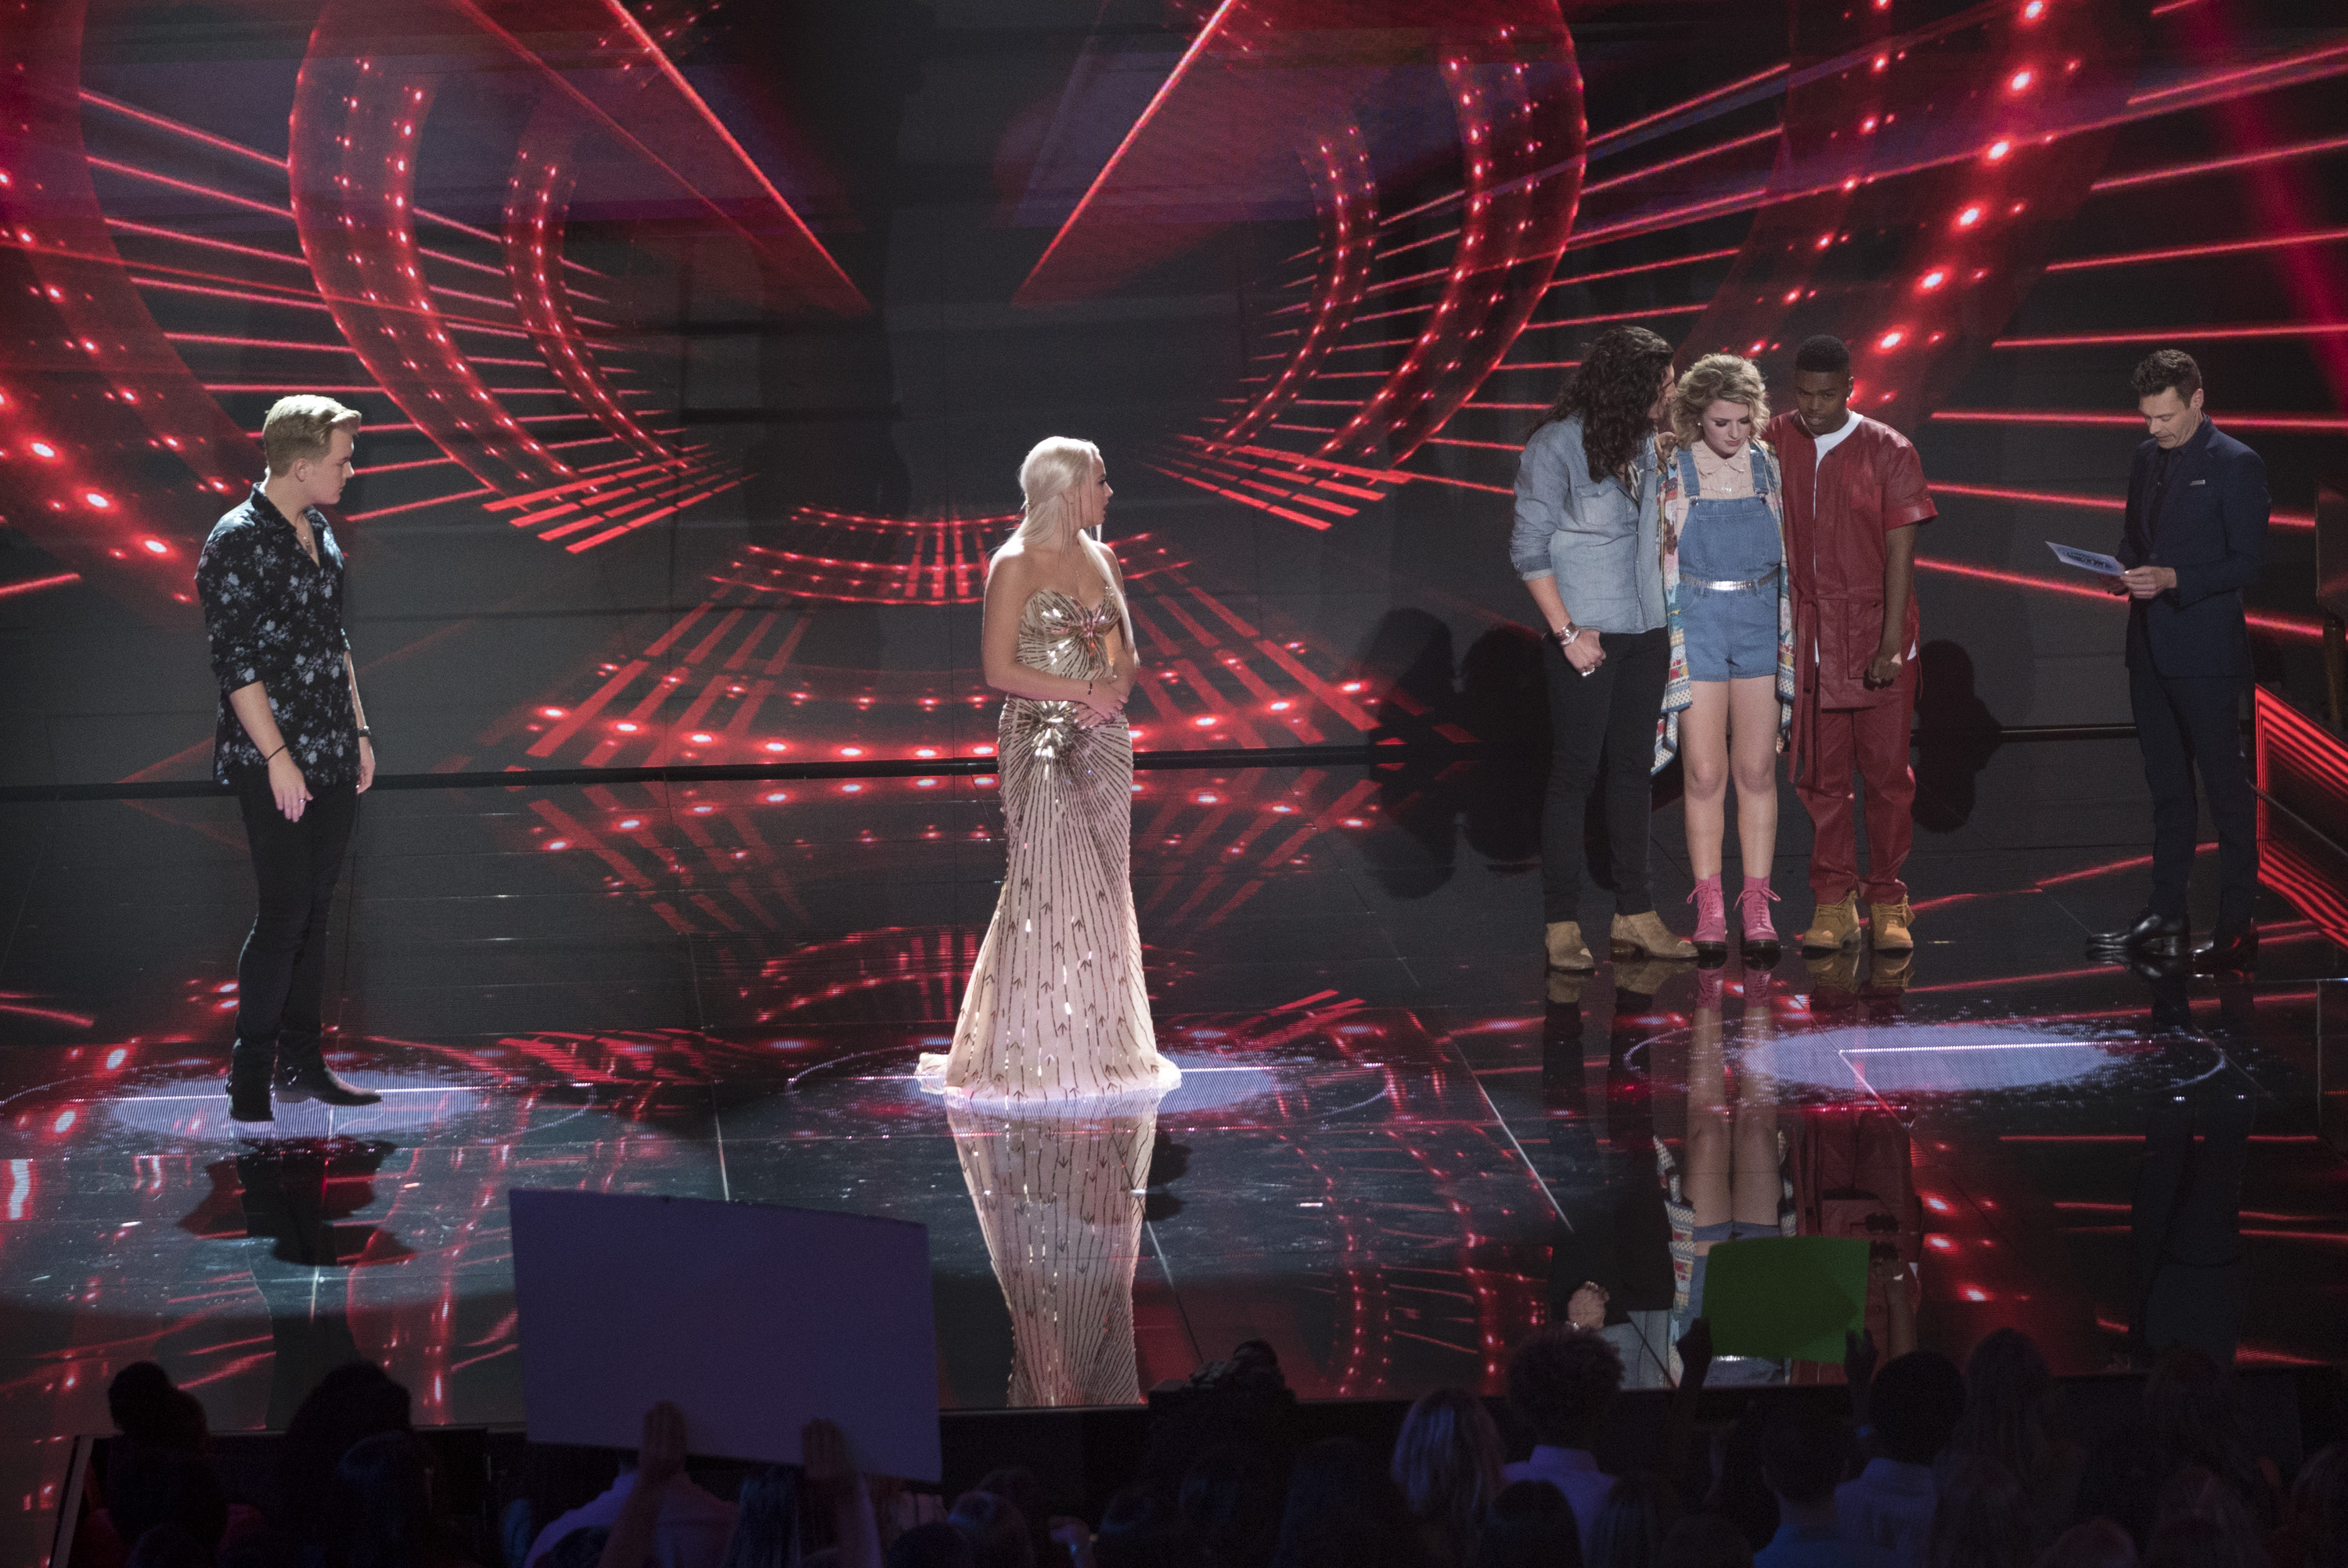 Gabby Barrett and the Top 5 on American Idol which aired live on ABC on May 13, 2018.
Photo credit: American Idol
